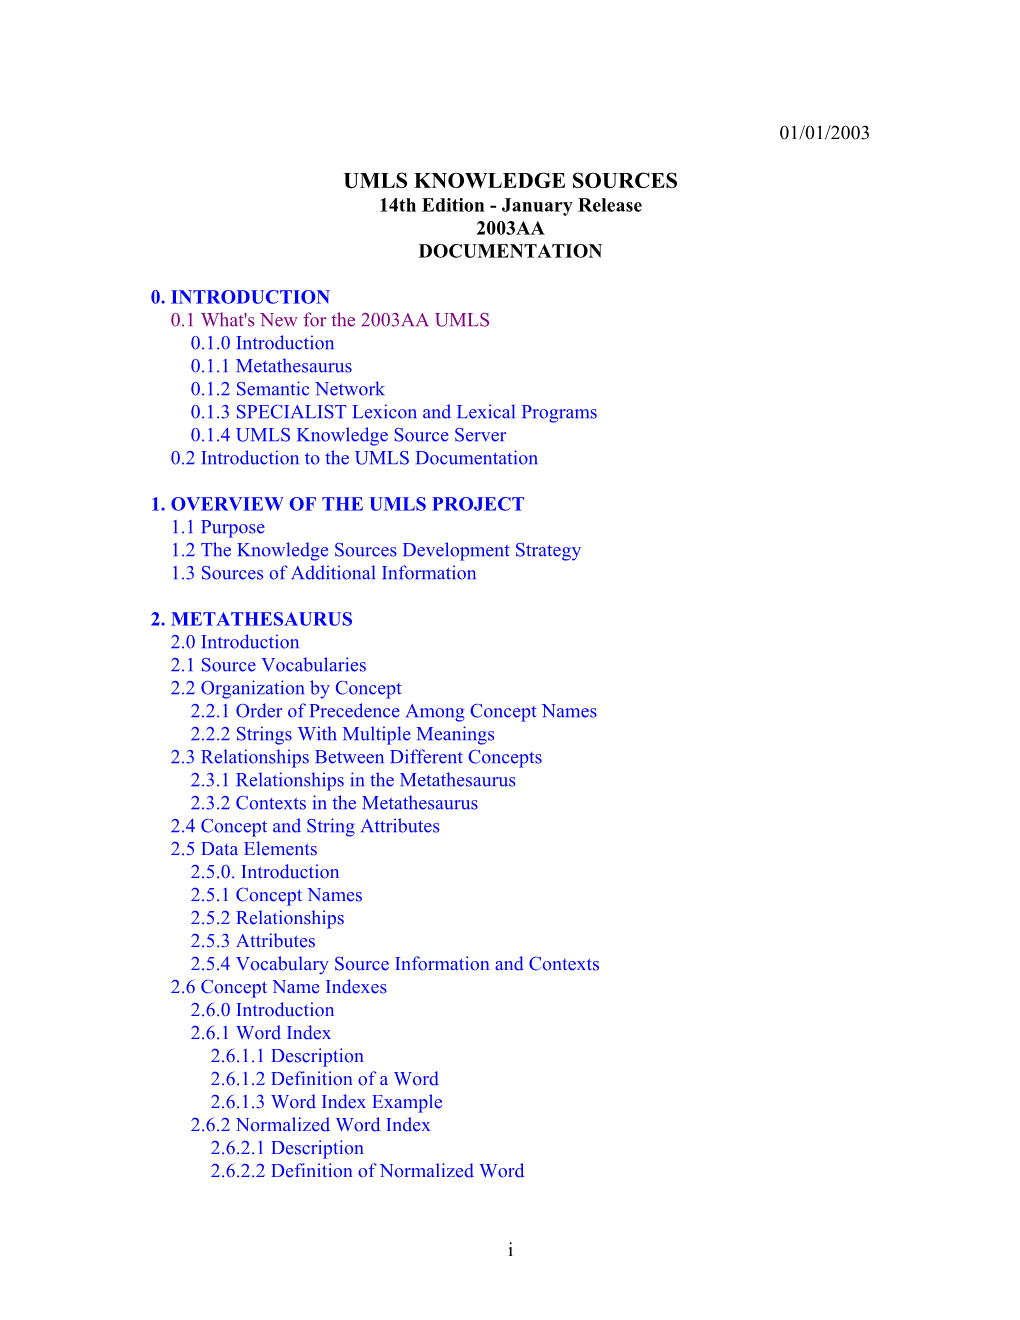 UMLS KNOWLEDGE SOURCES 14Th Edition - January Release 2003AA DOCUMENTATION